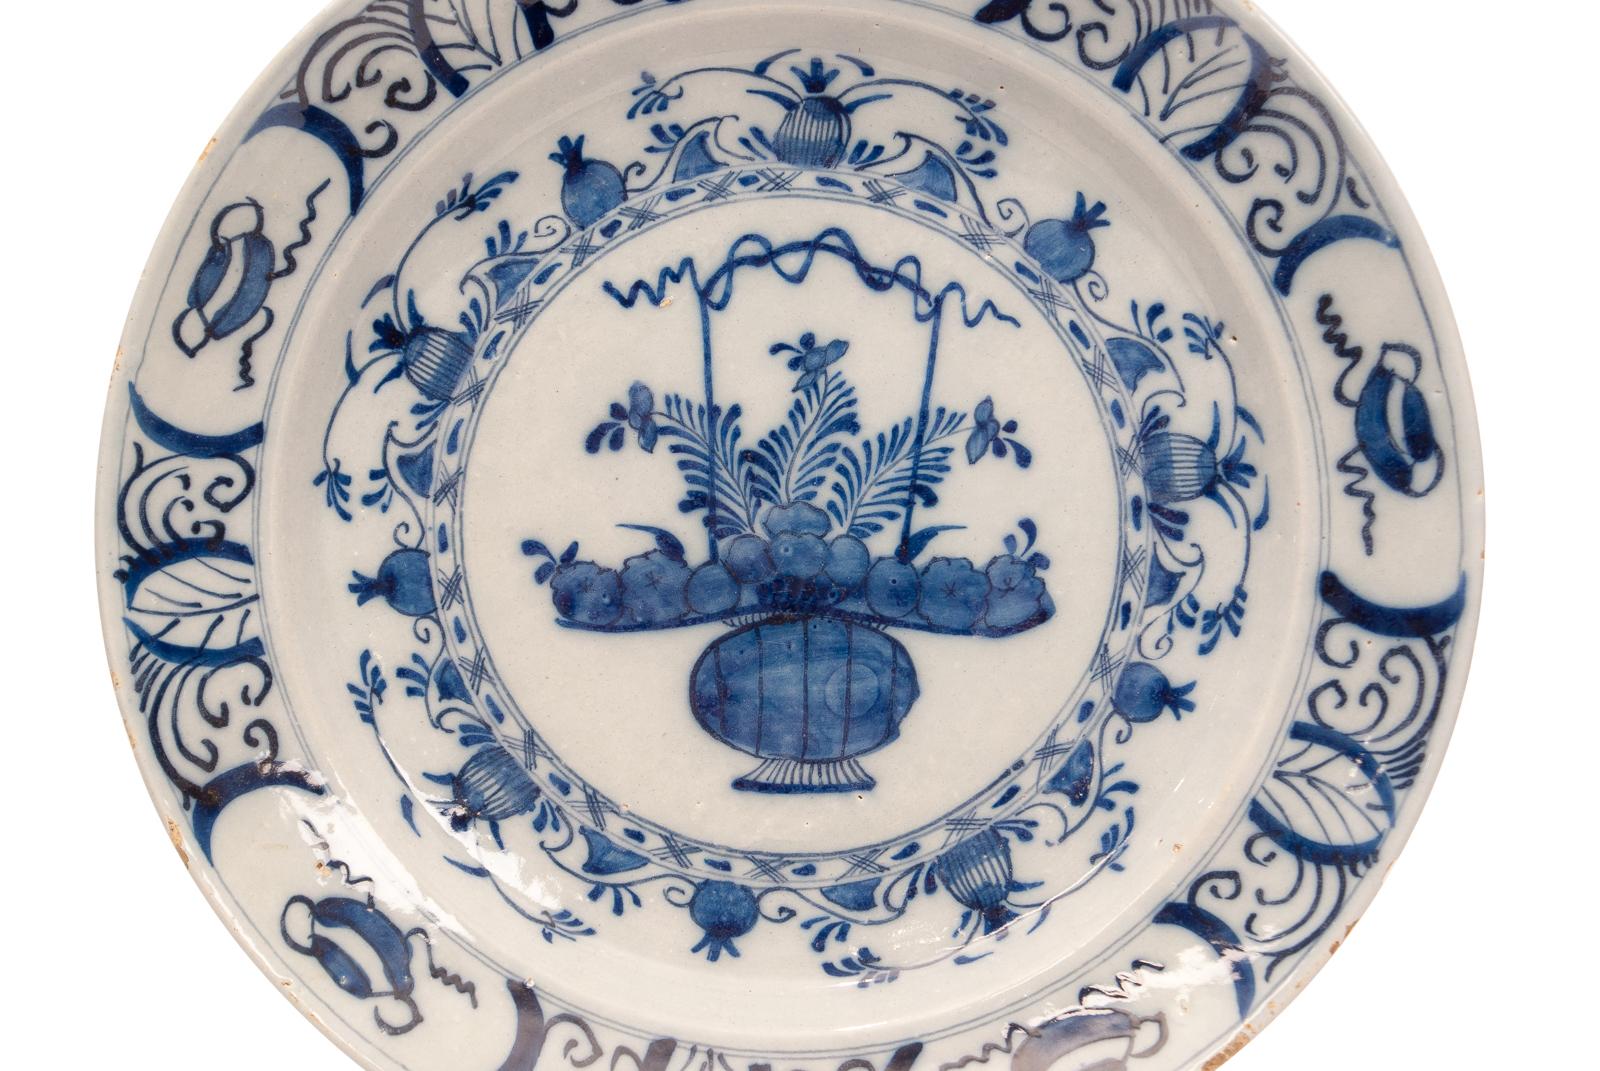 A late 17th-early 18th century Dutch blue and white delft charger. Made to imitate oriental blue and white. The tin glaze and pottery used meant that these pieces are fairly fragile and hard to find as so many where broken over time. At the moment